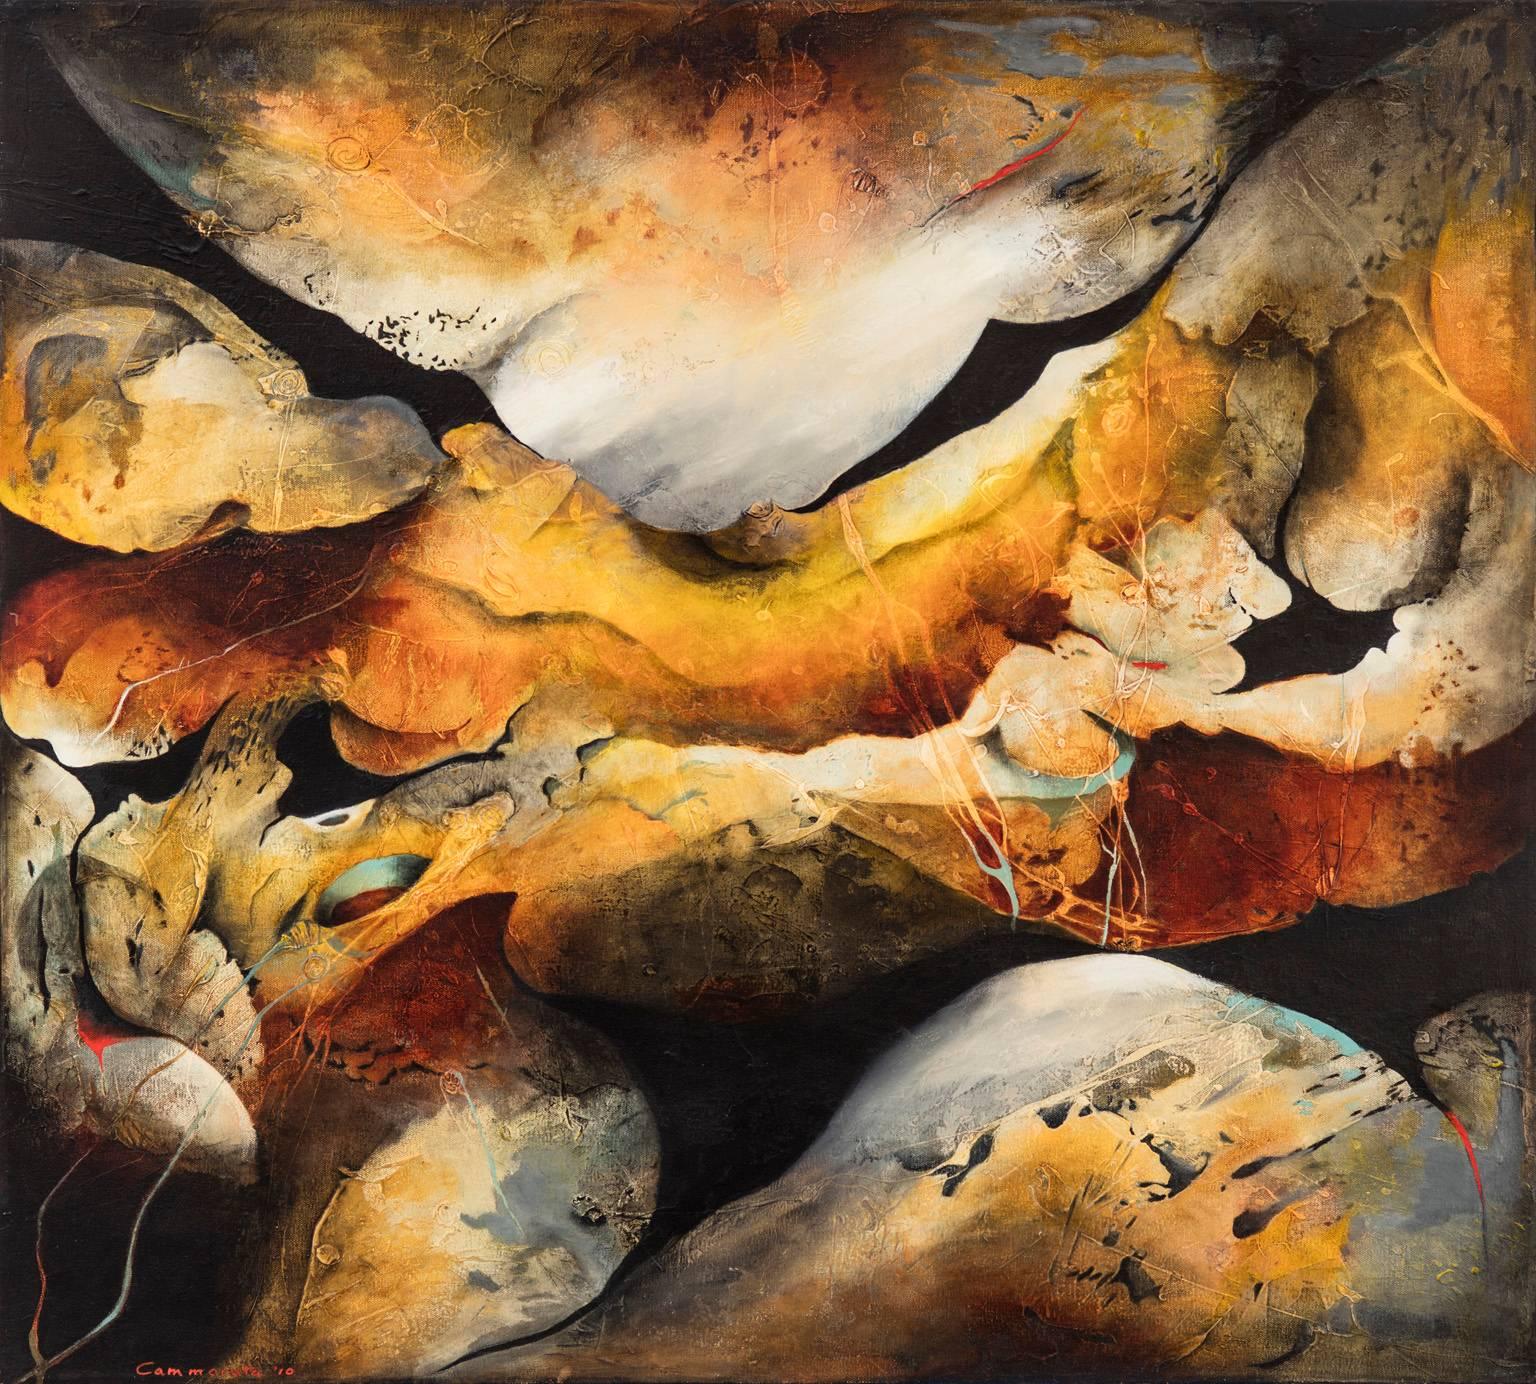 Kathleen Cammarata Abstract Painting - "Omen" - Horizontal abstract painting in neutral and warm autumn colors.